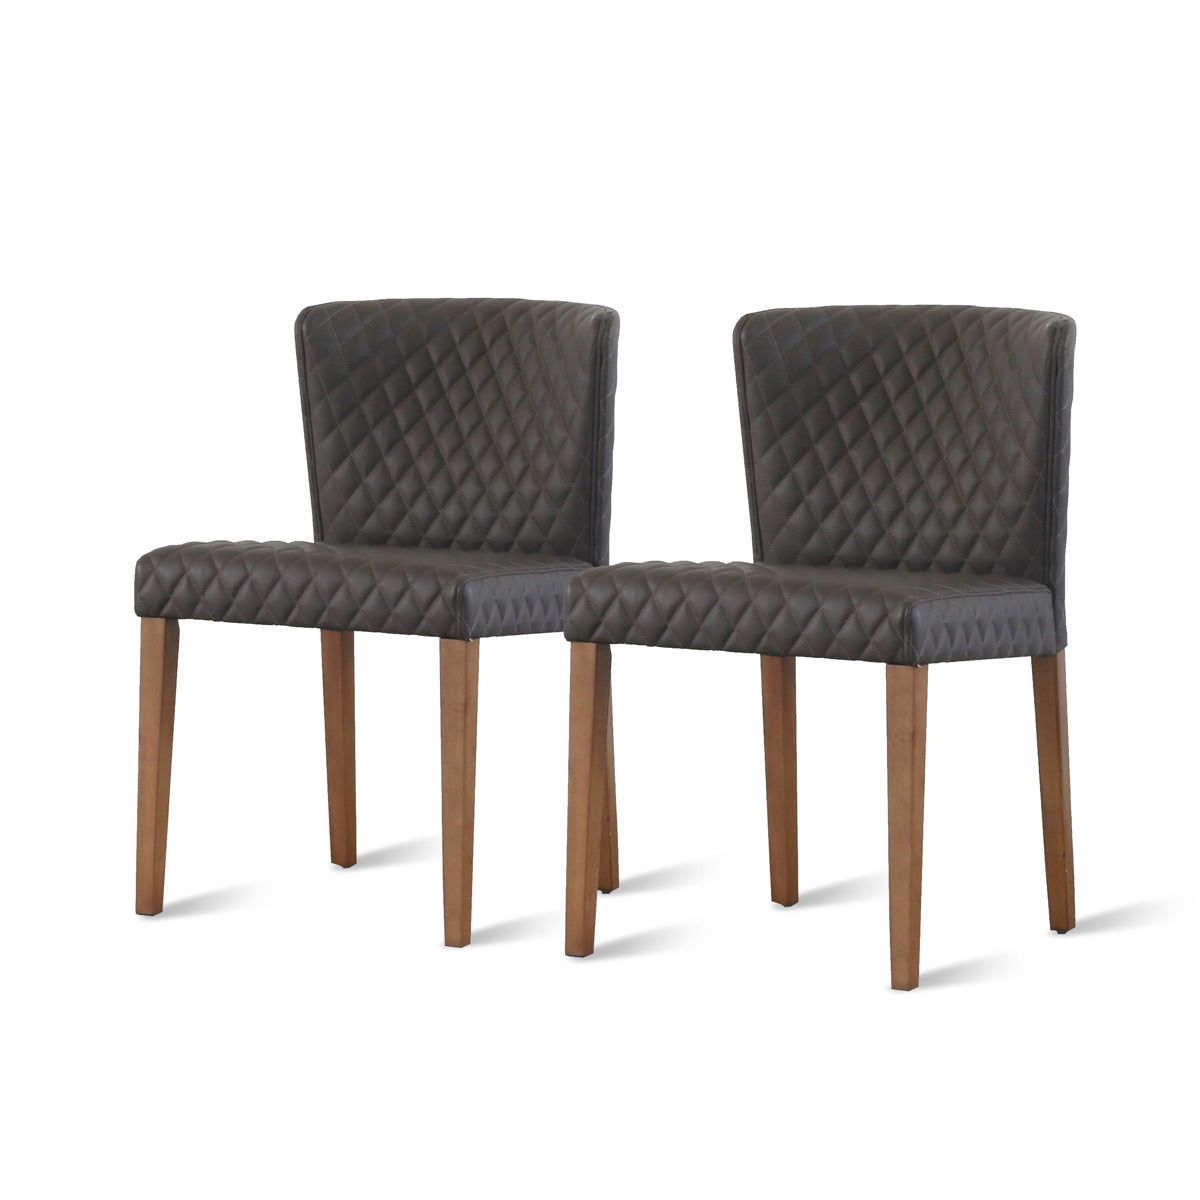 Albie Diamond Stitching PU Leather Chair - Set of 2 by New Pacific Direct - 3900047-401